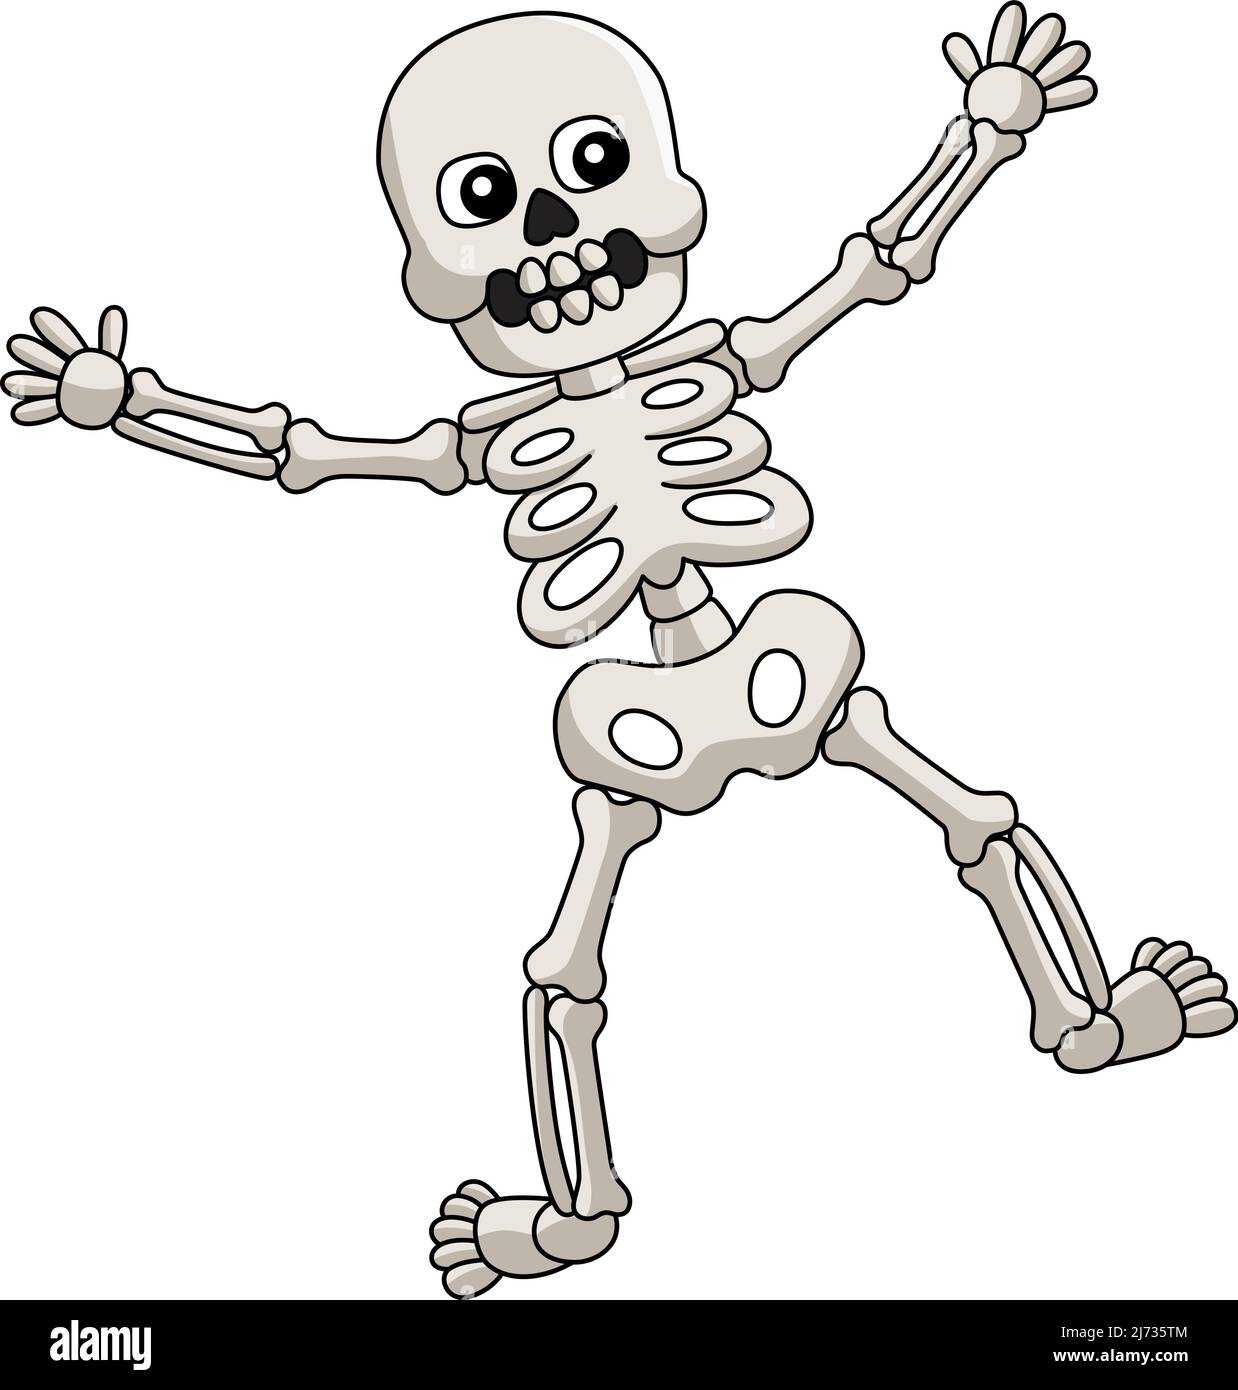 Dancing skeleton Cut Out Stock Images & Pictures - Alamy